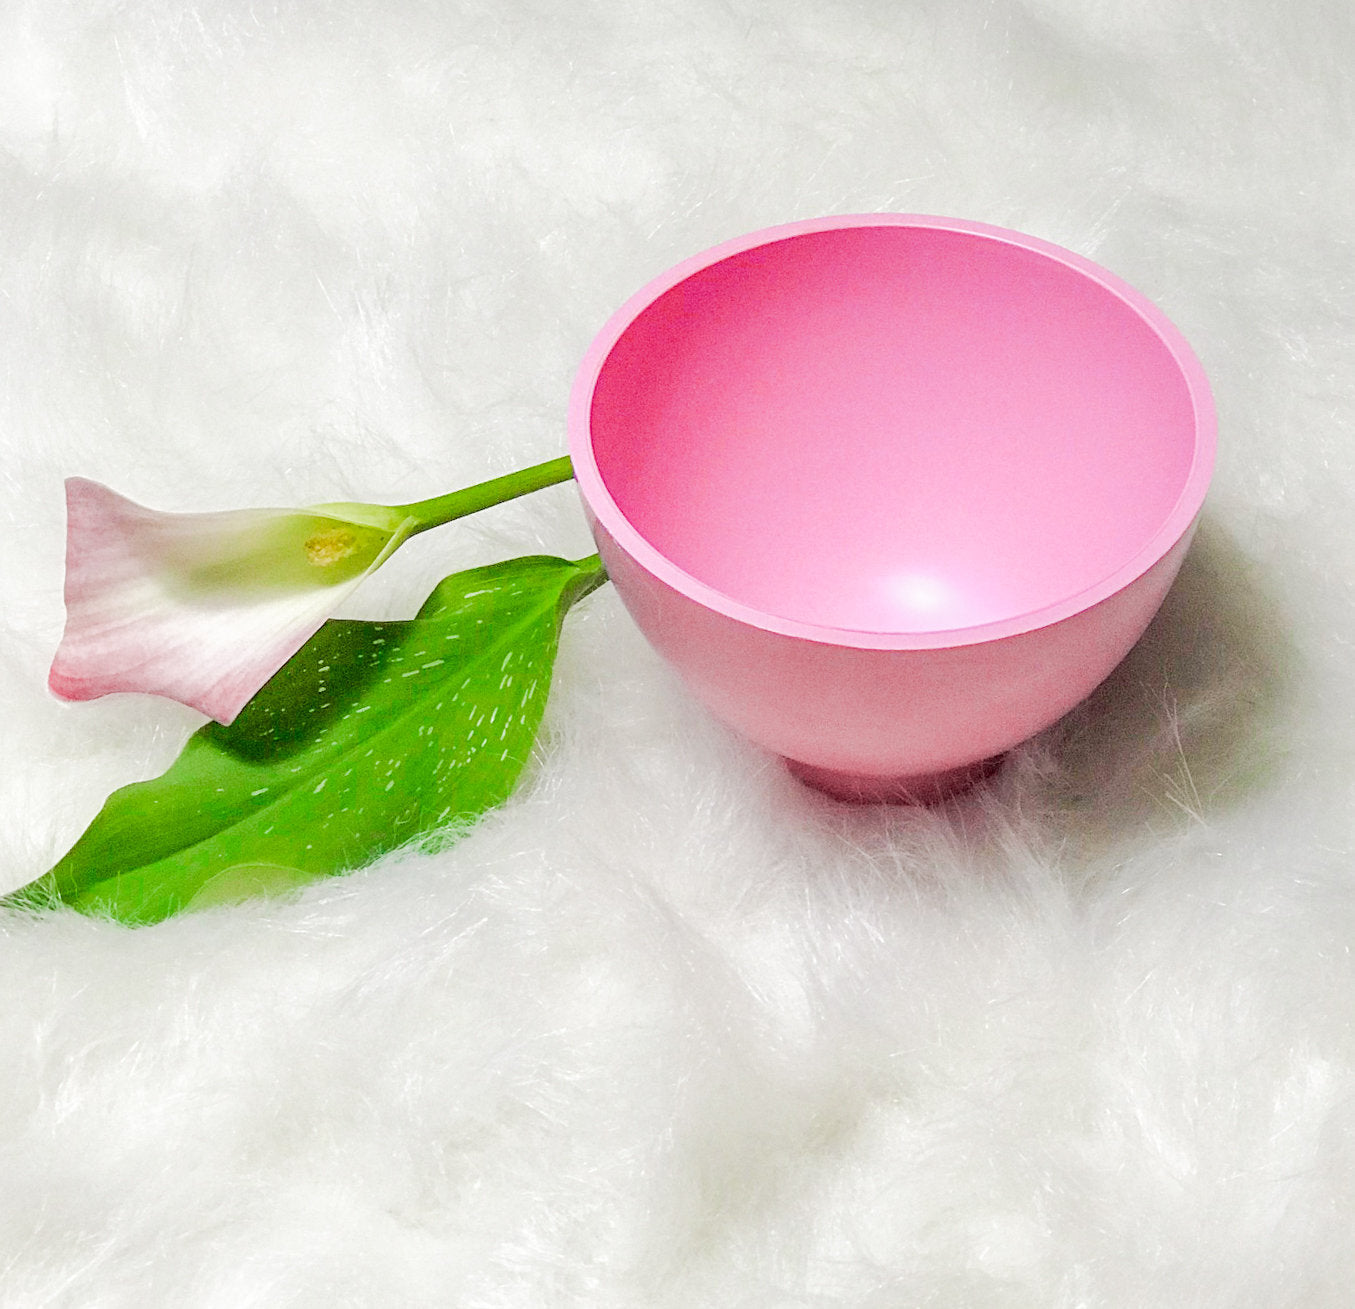 Mask Mixing Bowl Silicone, Silicone Beauty Supplies